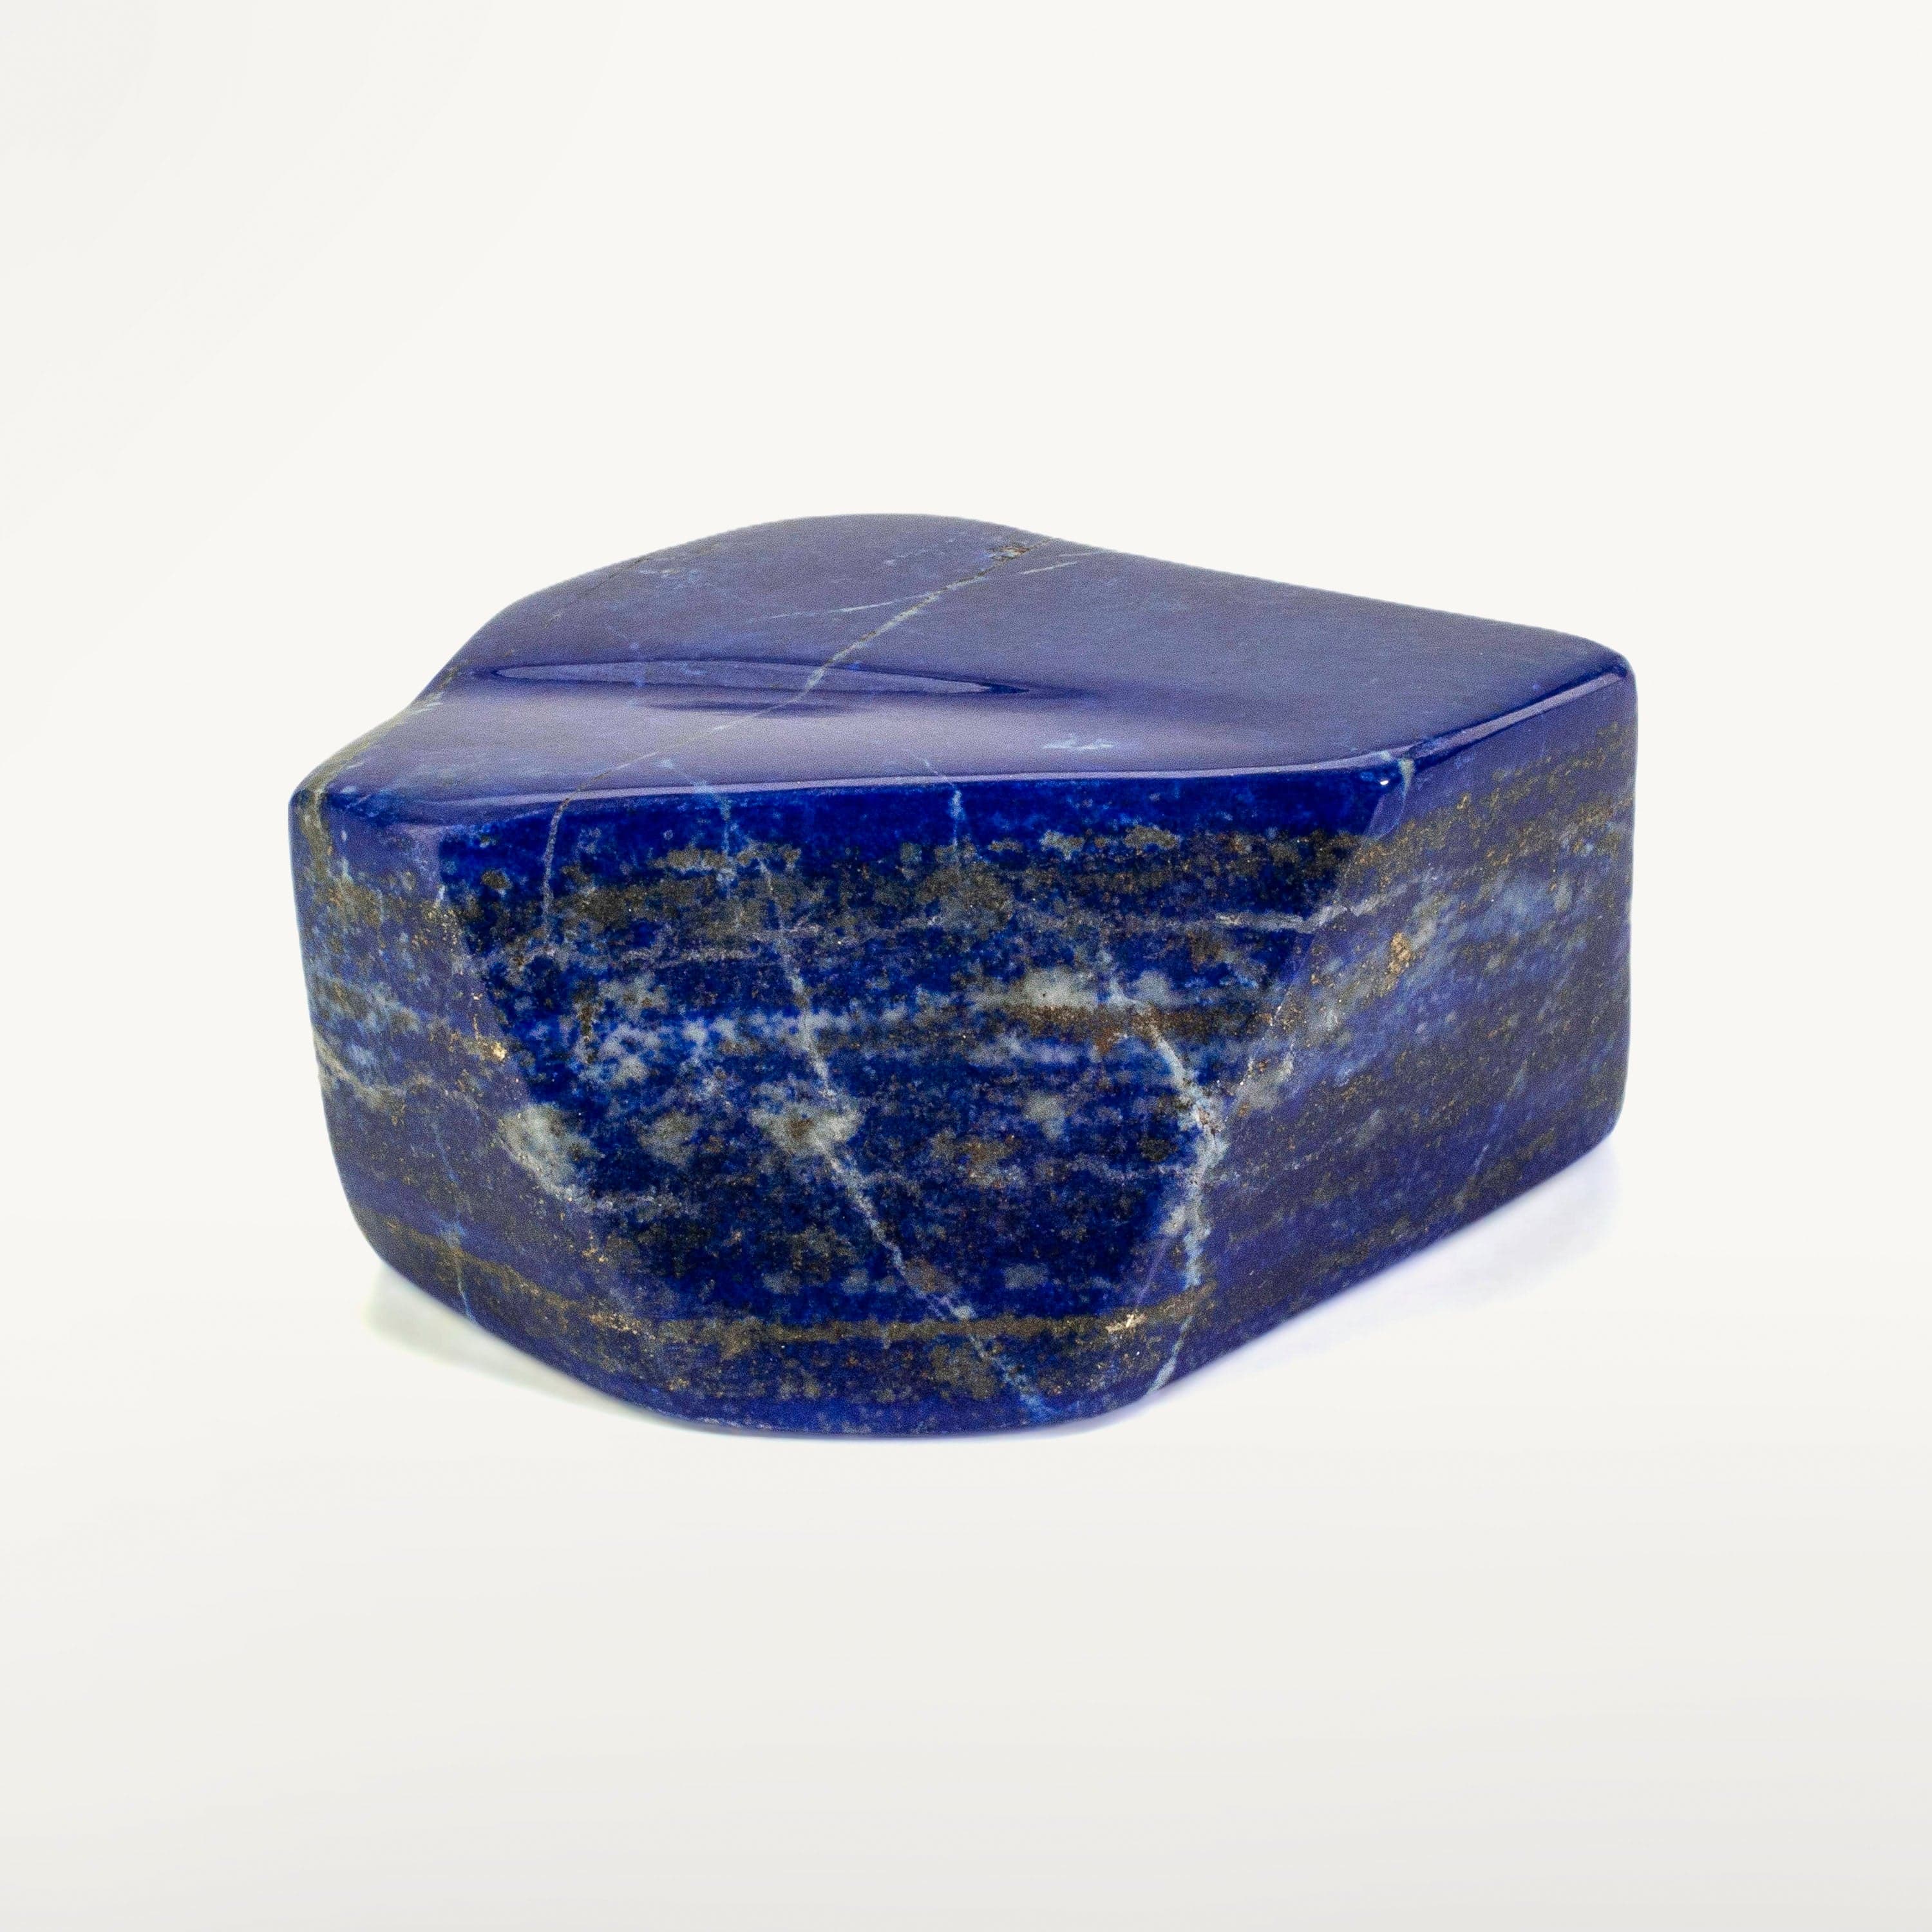 Kalifano Lapis Lapis Lazuil Freeform from Afghanistan - 825 g / 1.8 lbs LP900.008